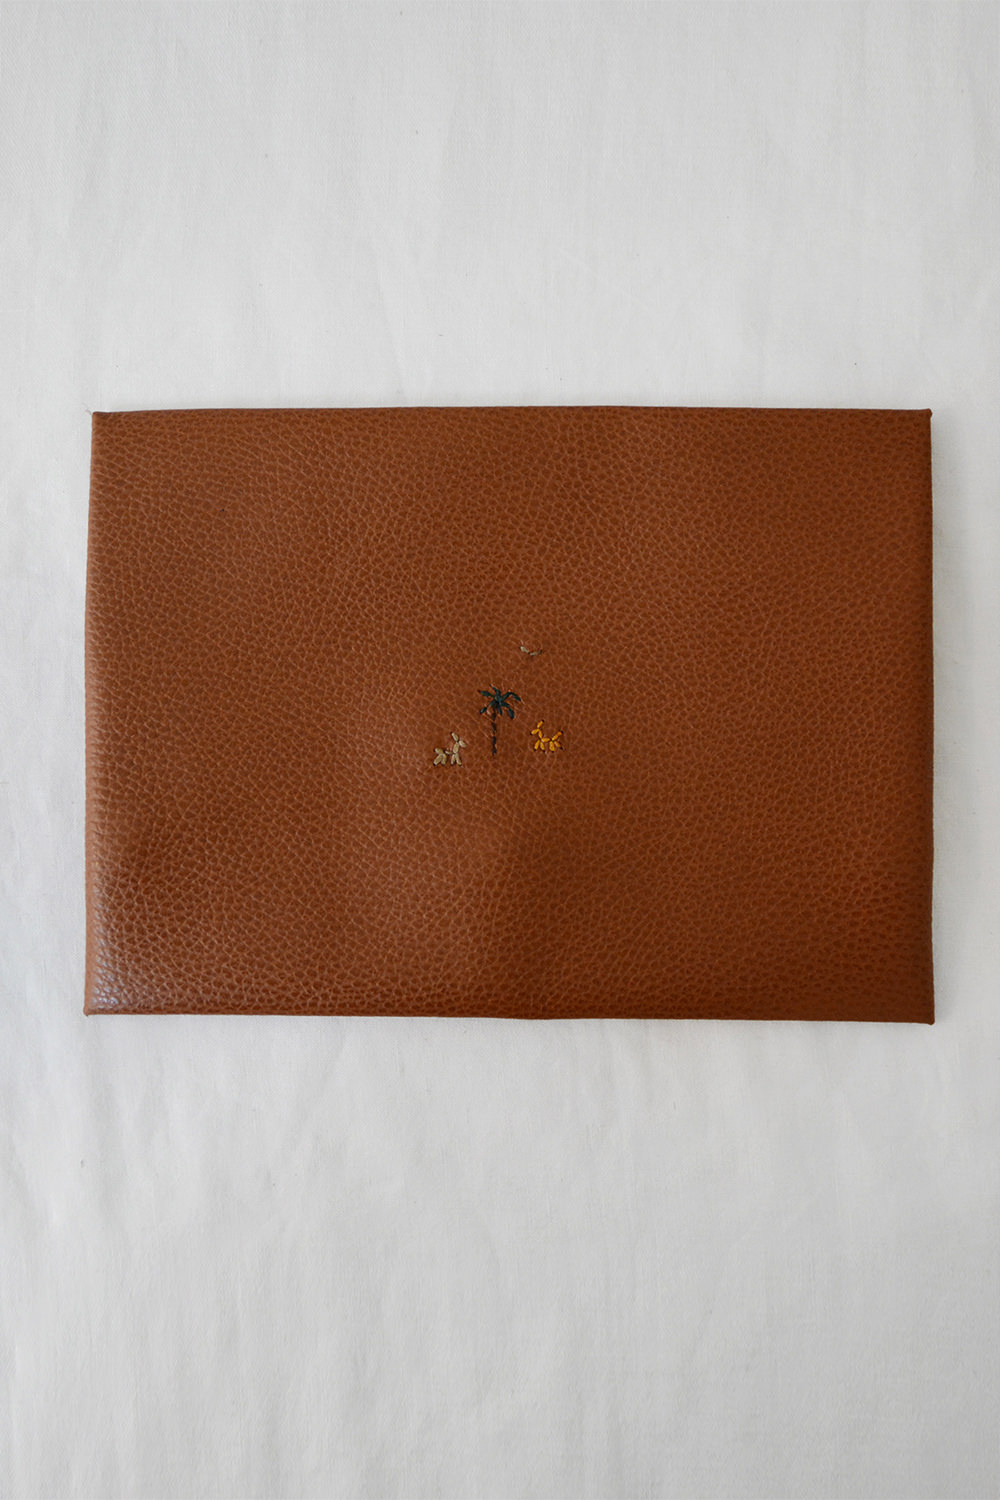 Henri、アンリ、leather goods、handcrafted leather、革小物、ハンドクラフト、Large envelope、ラージエンベロープ、utility case、ユーティリティーケース、made in Italy